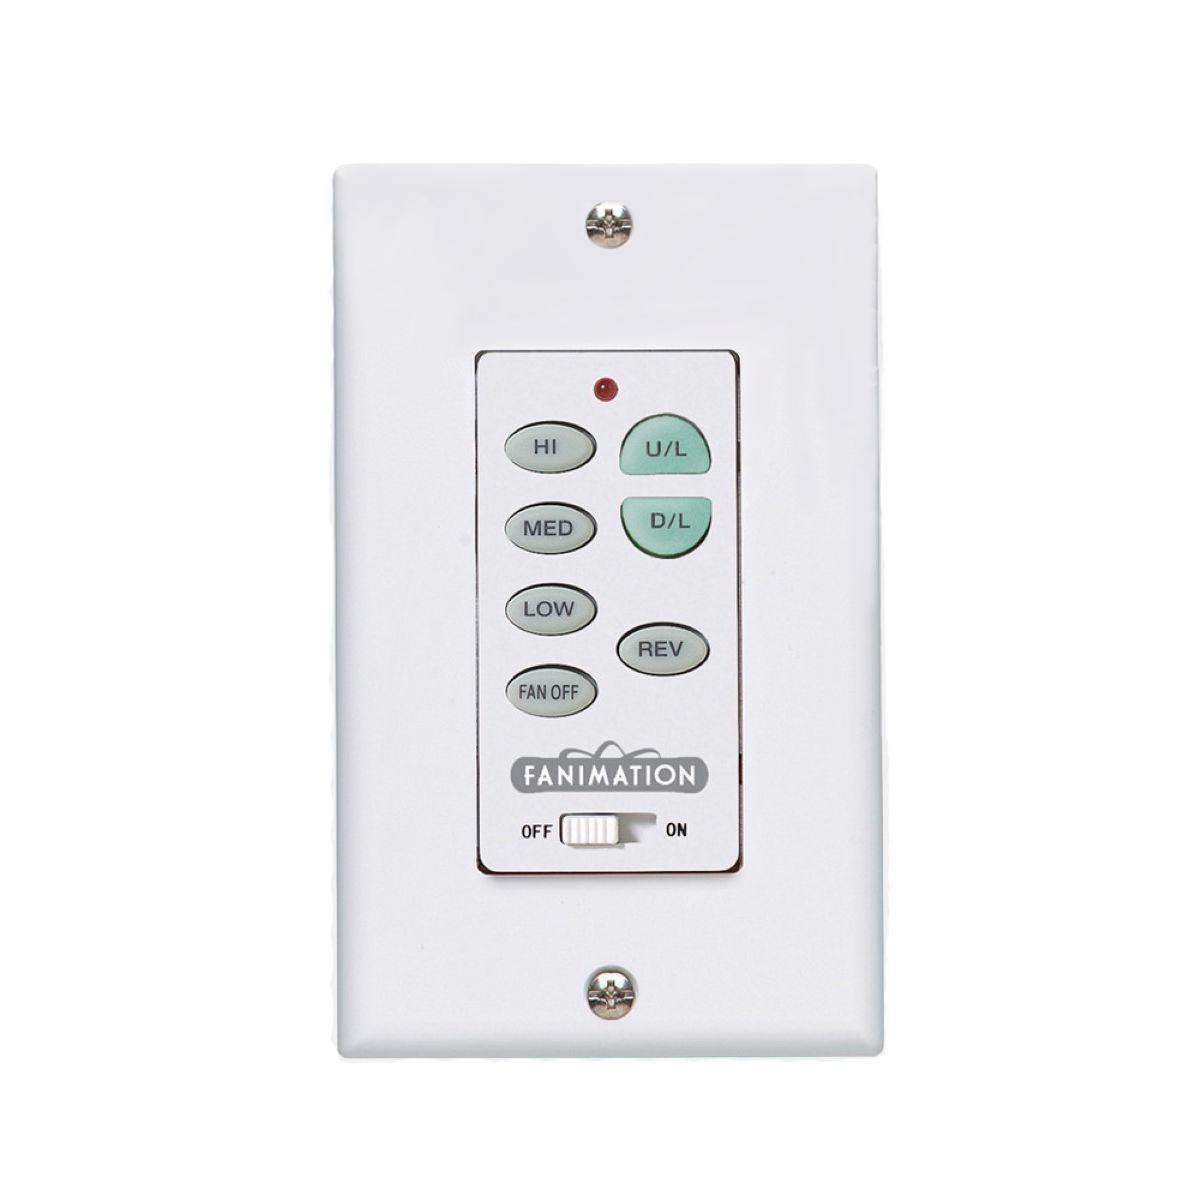 3-Speed Ceiling Fan And Up/Down Light Wall Control, Reversing Switch, White Finish